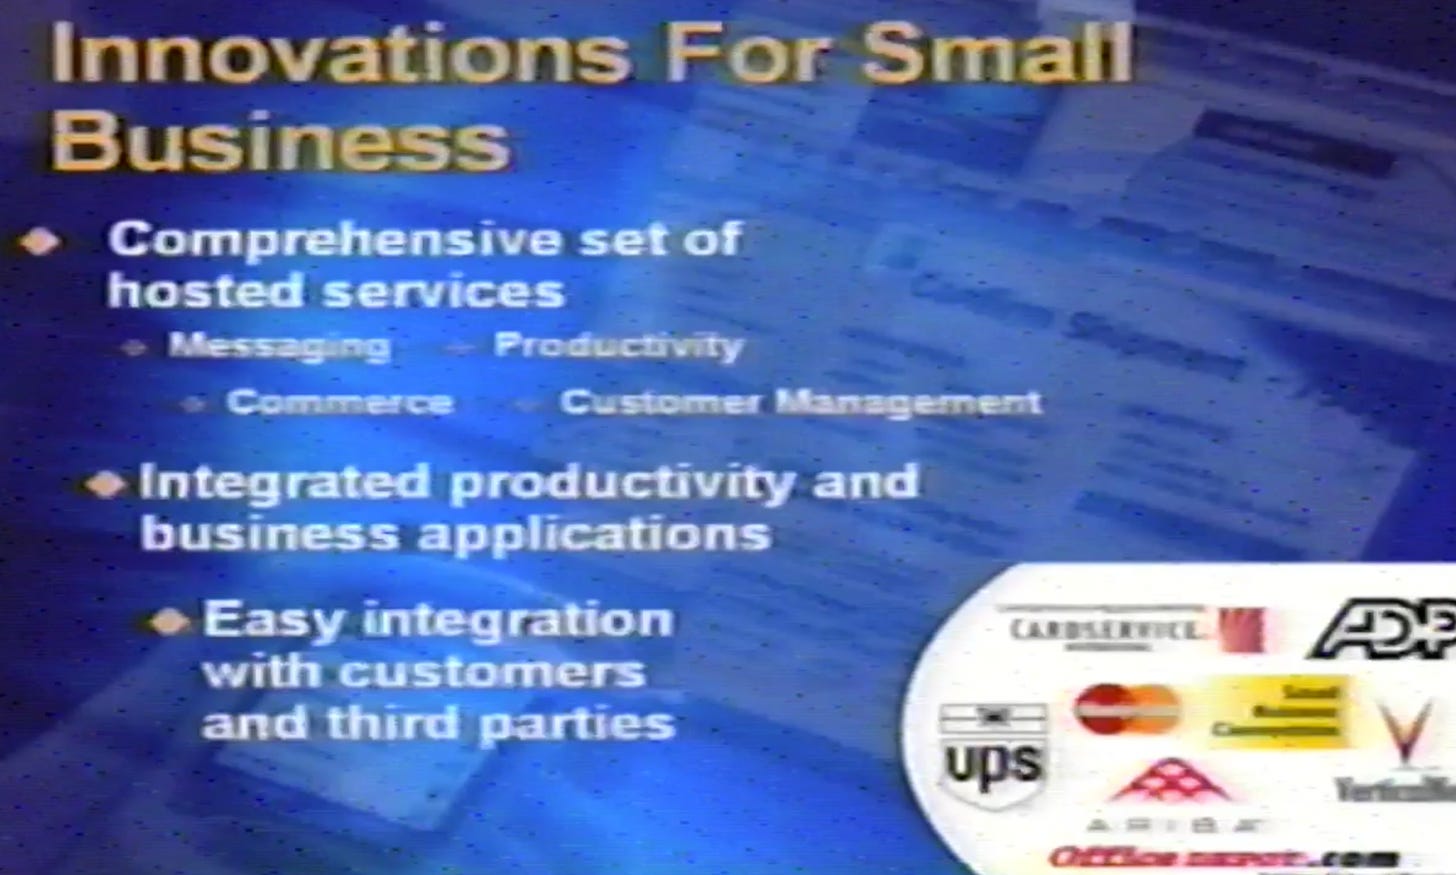 Innovations for Small Business